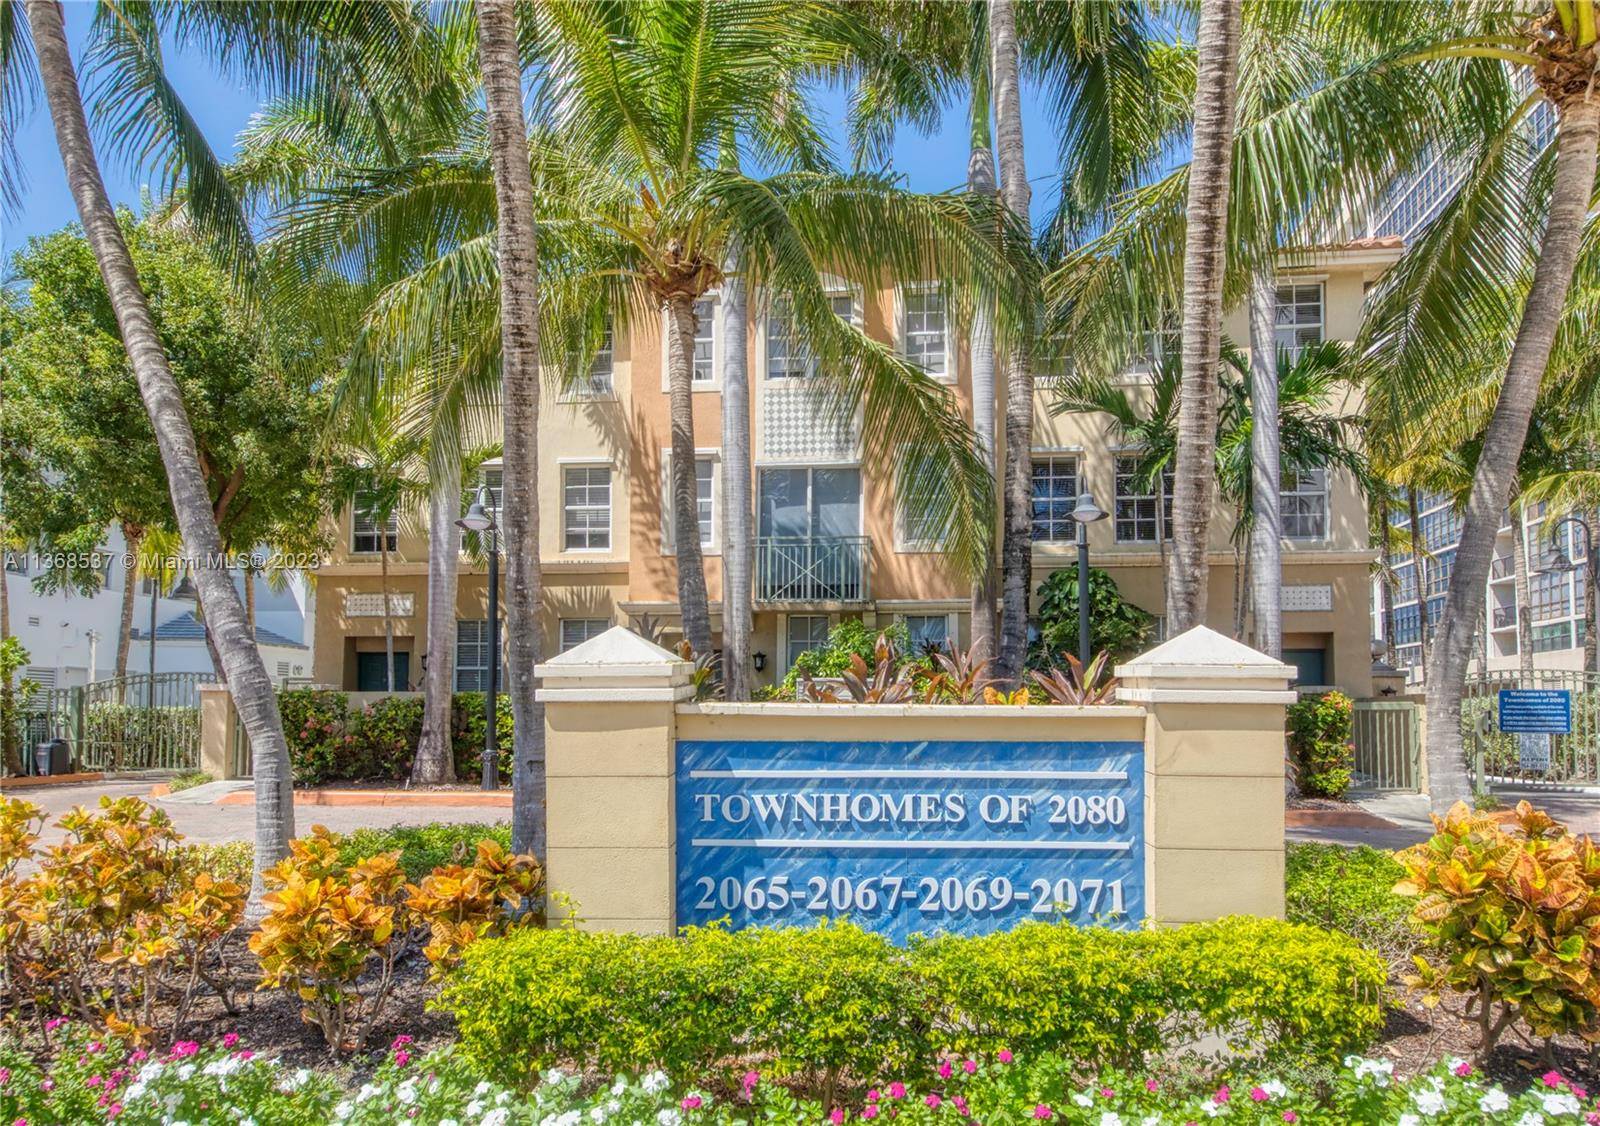 Perfect location ! All the privacy of a gated community with direct beach access and full resort style amenities.